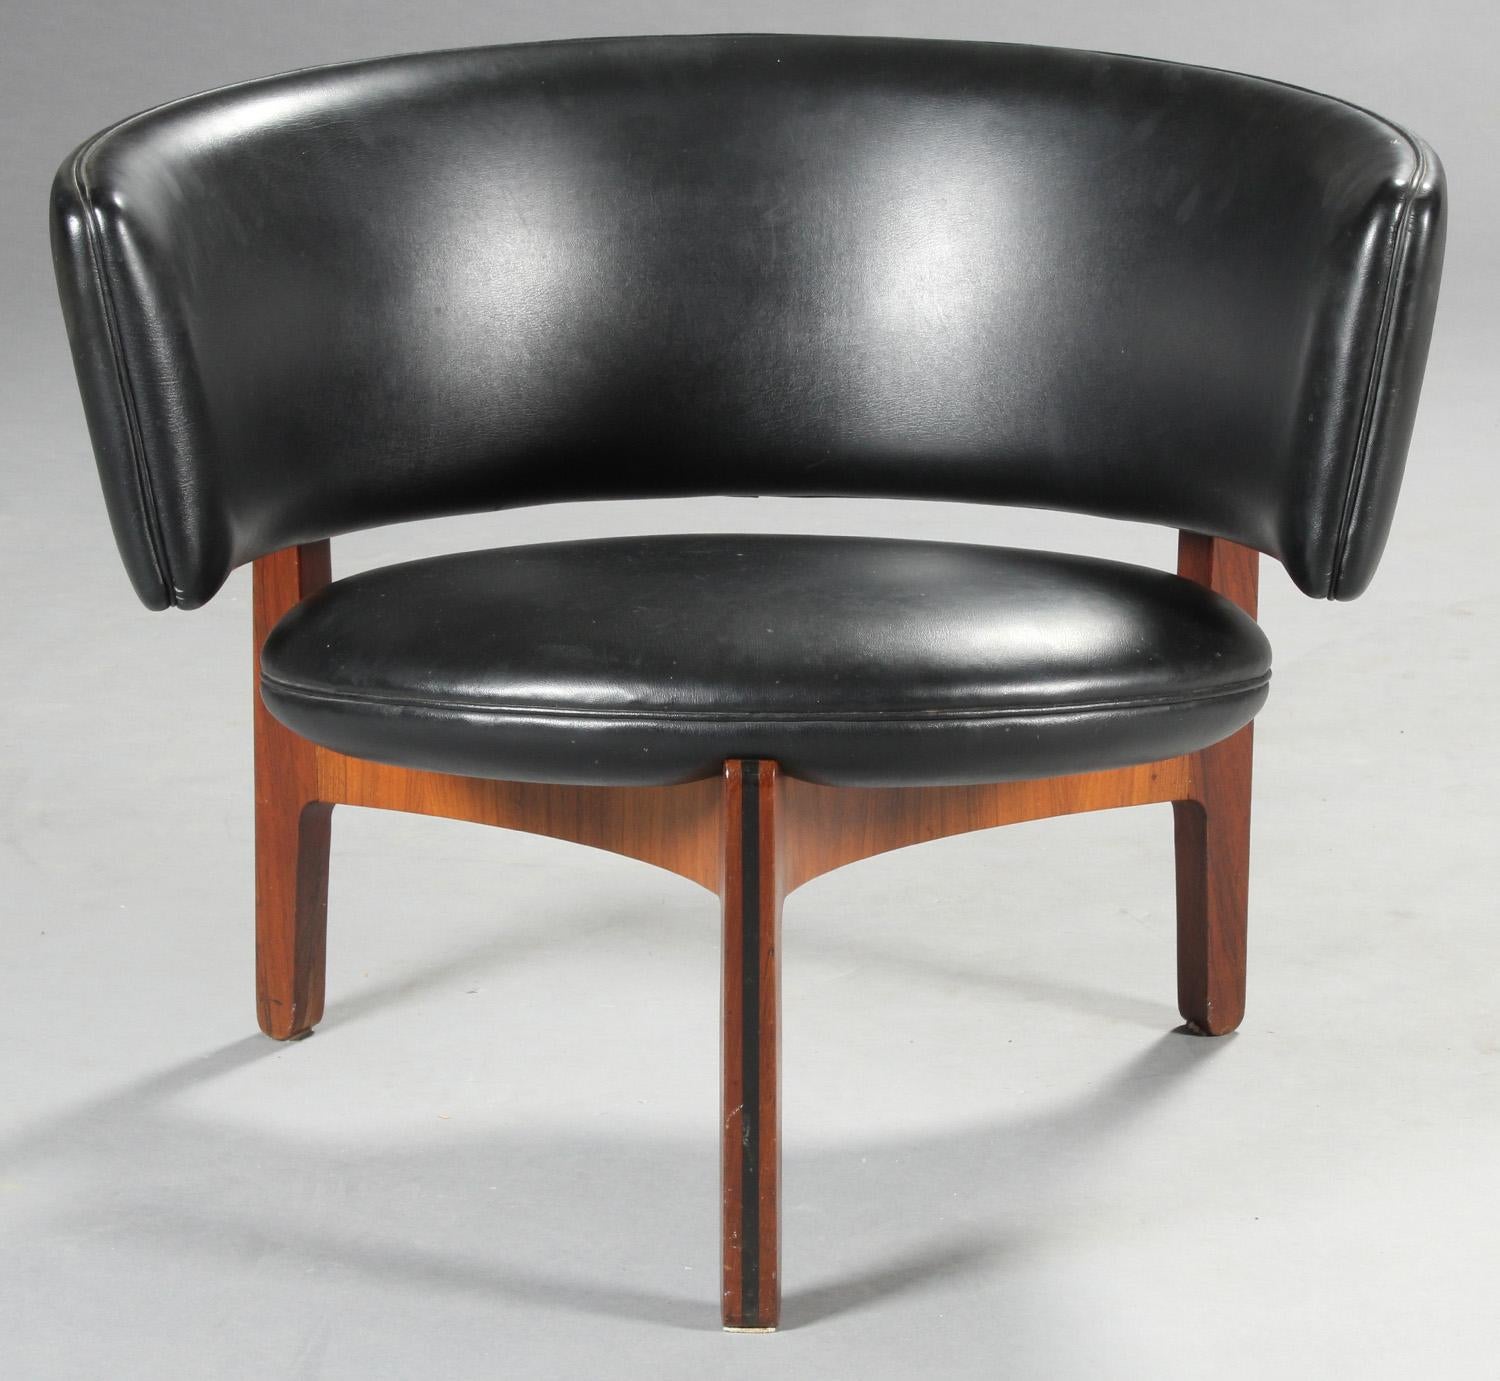 1960s Sven Ellekaer Danish rosewood lounge chair by Chrhristian Linnebergs Møbelfabrik

The highly collectible well designed chair with it´s excellent crafted three-legged frame in rosewood and inlaid ebony is by many considered to be among the